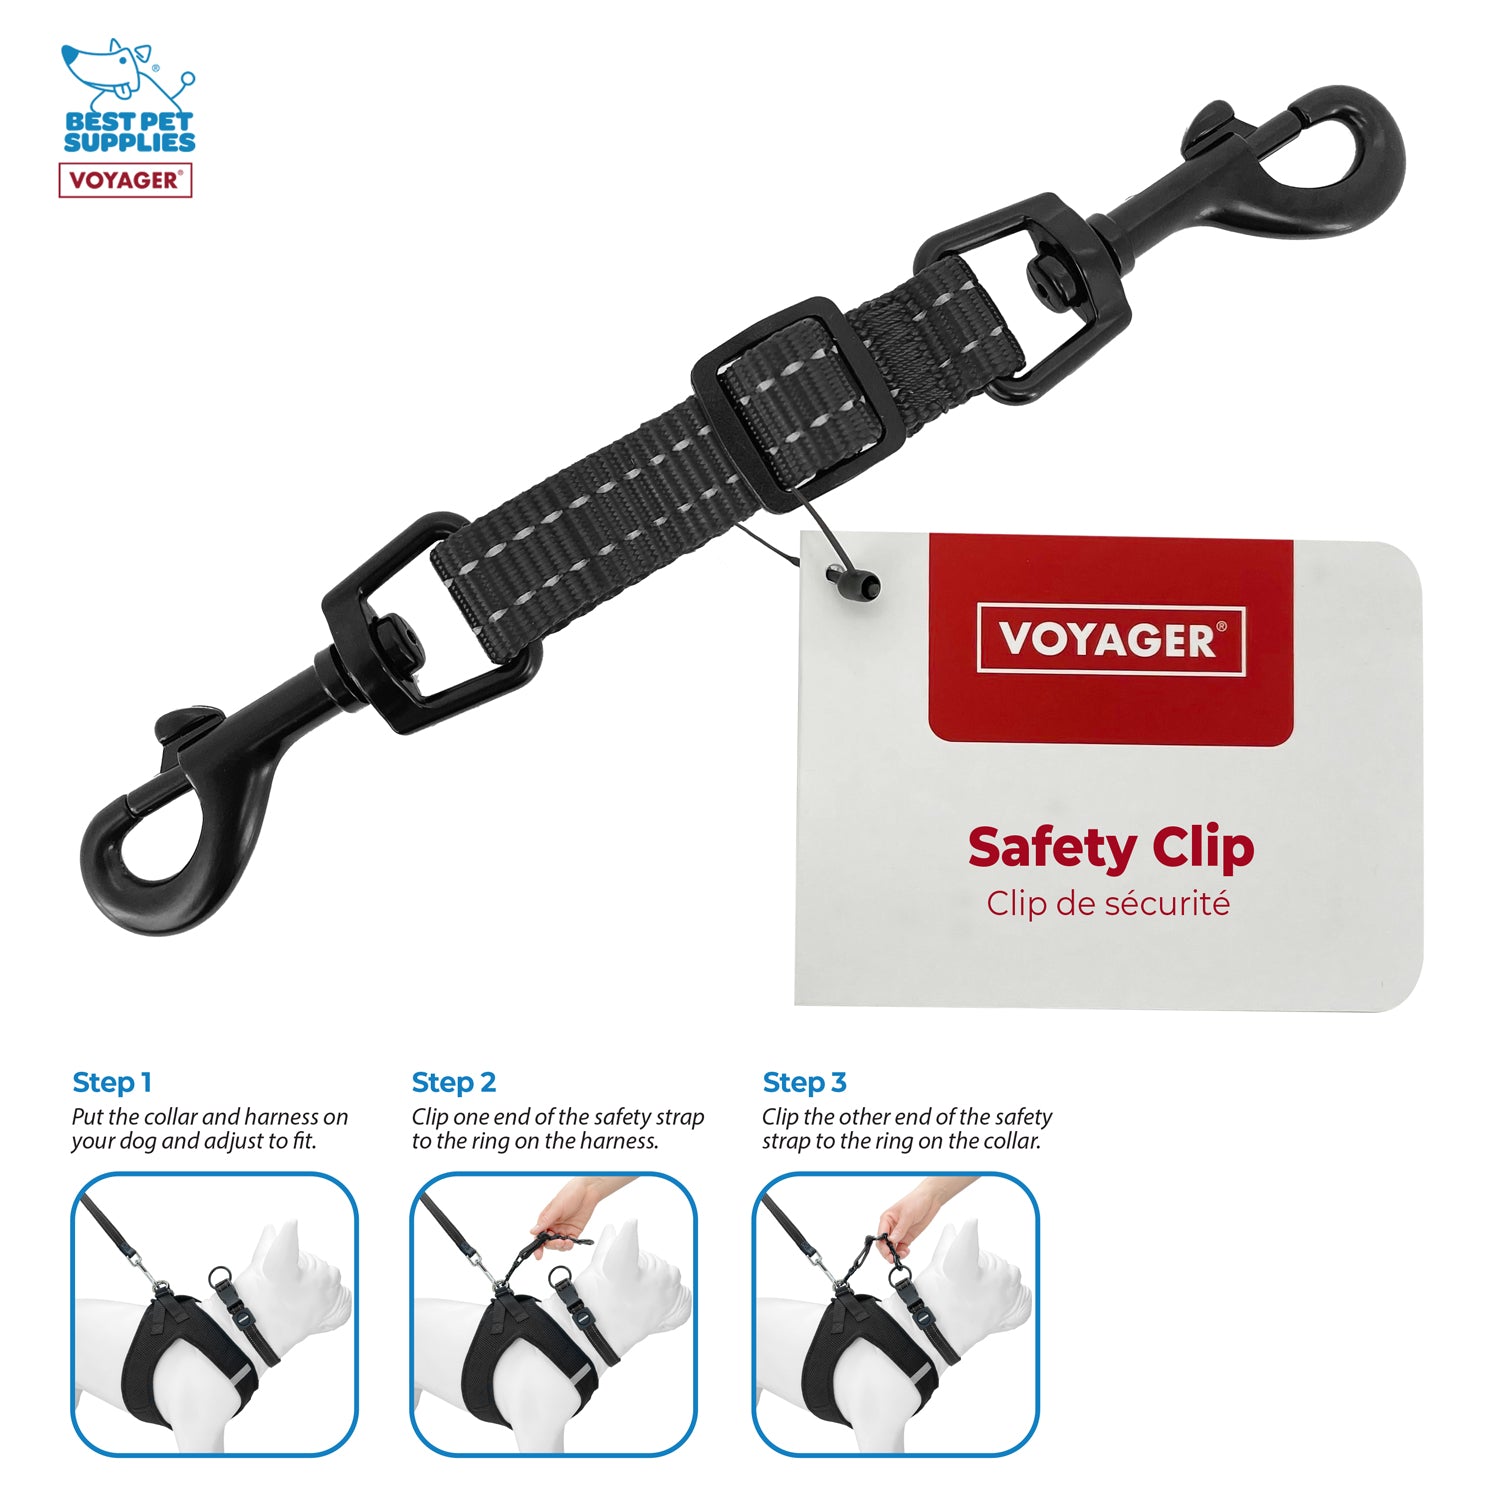 Dog Safety Accessory - Secondary Collar/Harness Attachment